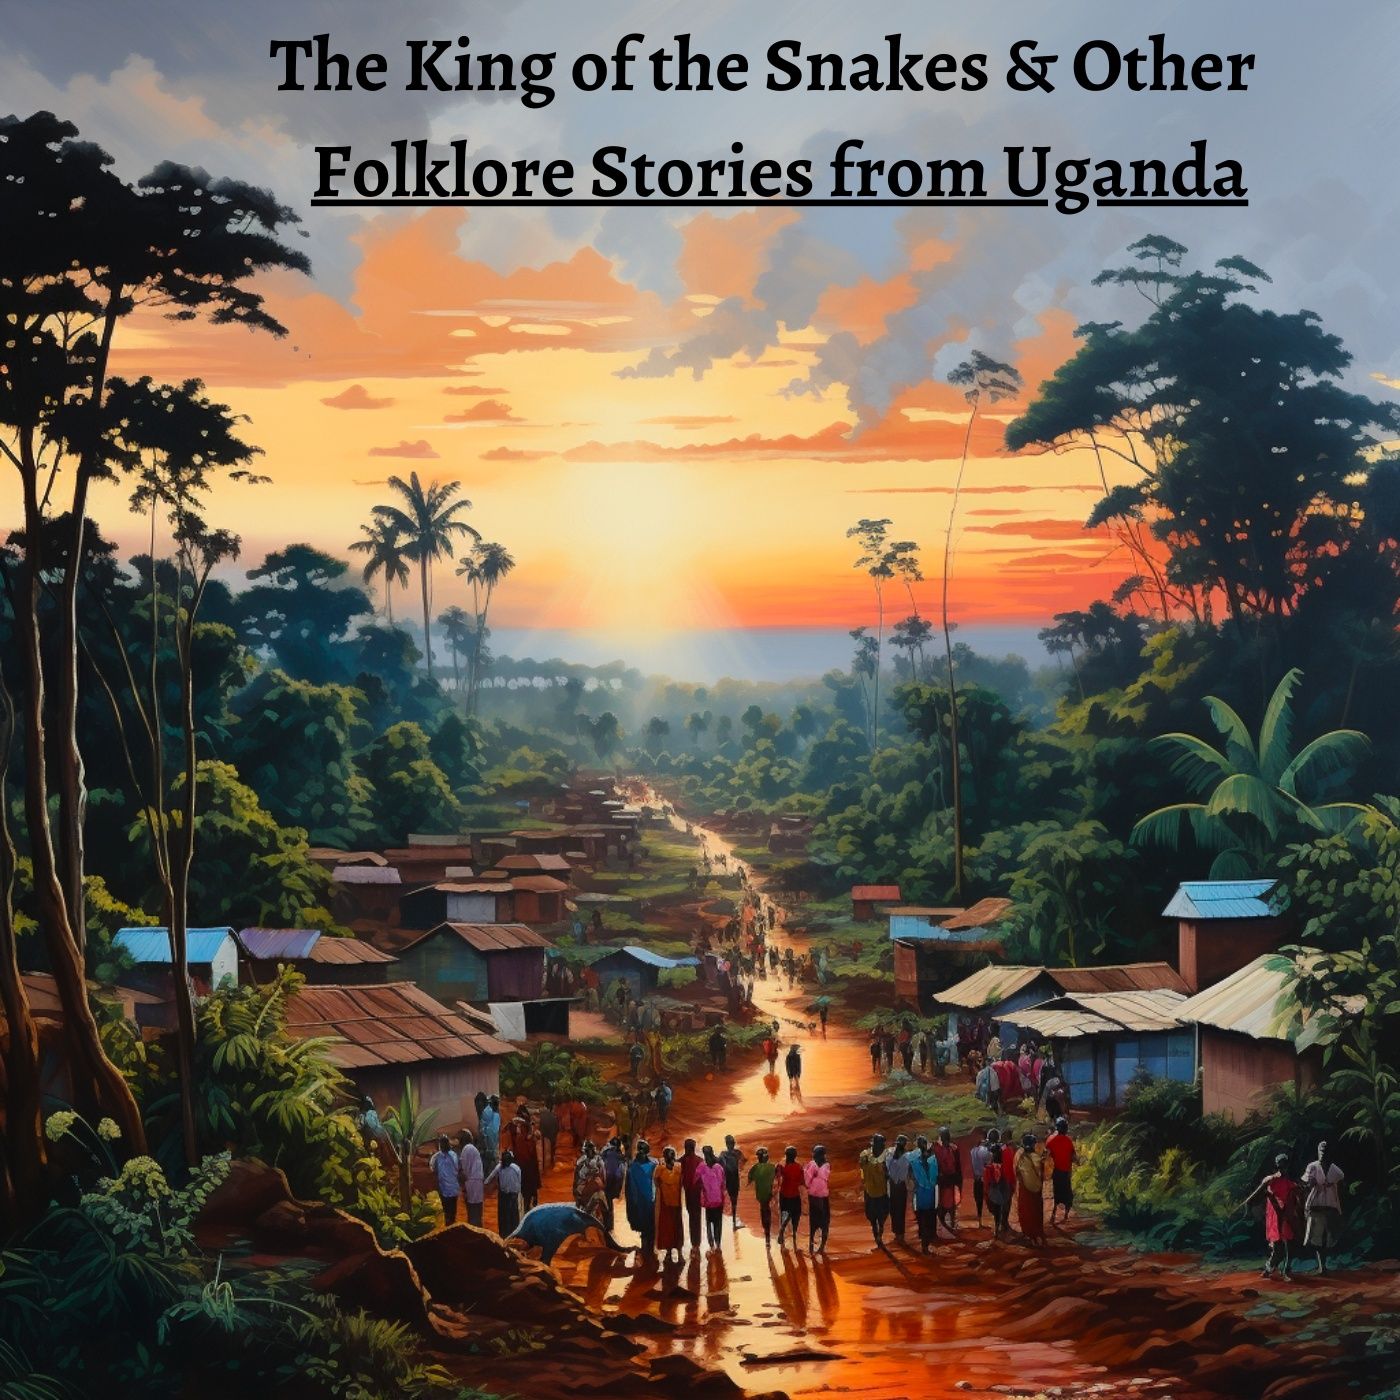 The King of the Snakes and Other Folklore Stories from Uganda